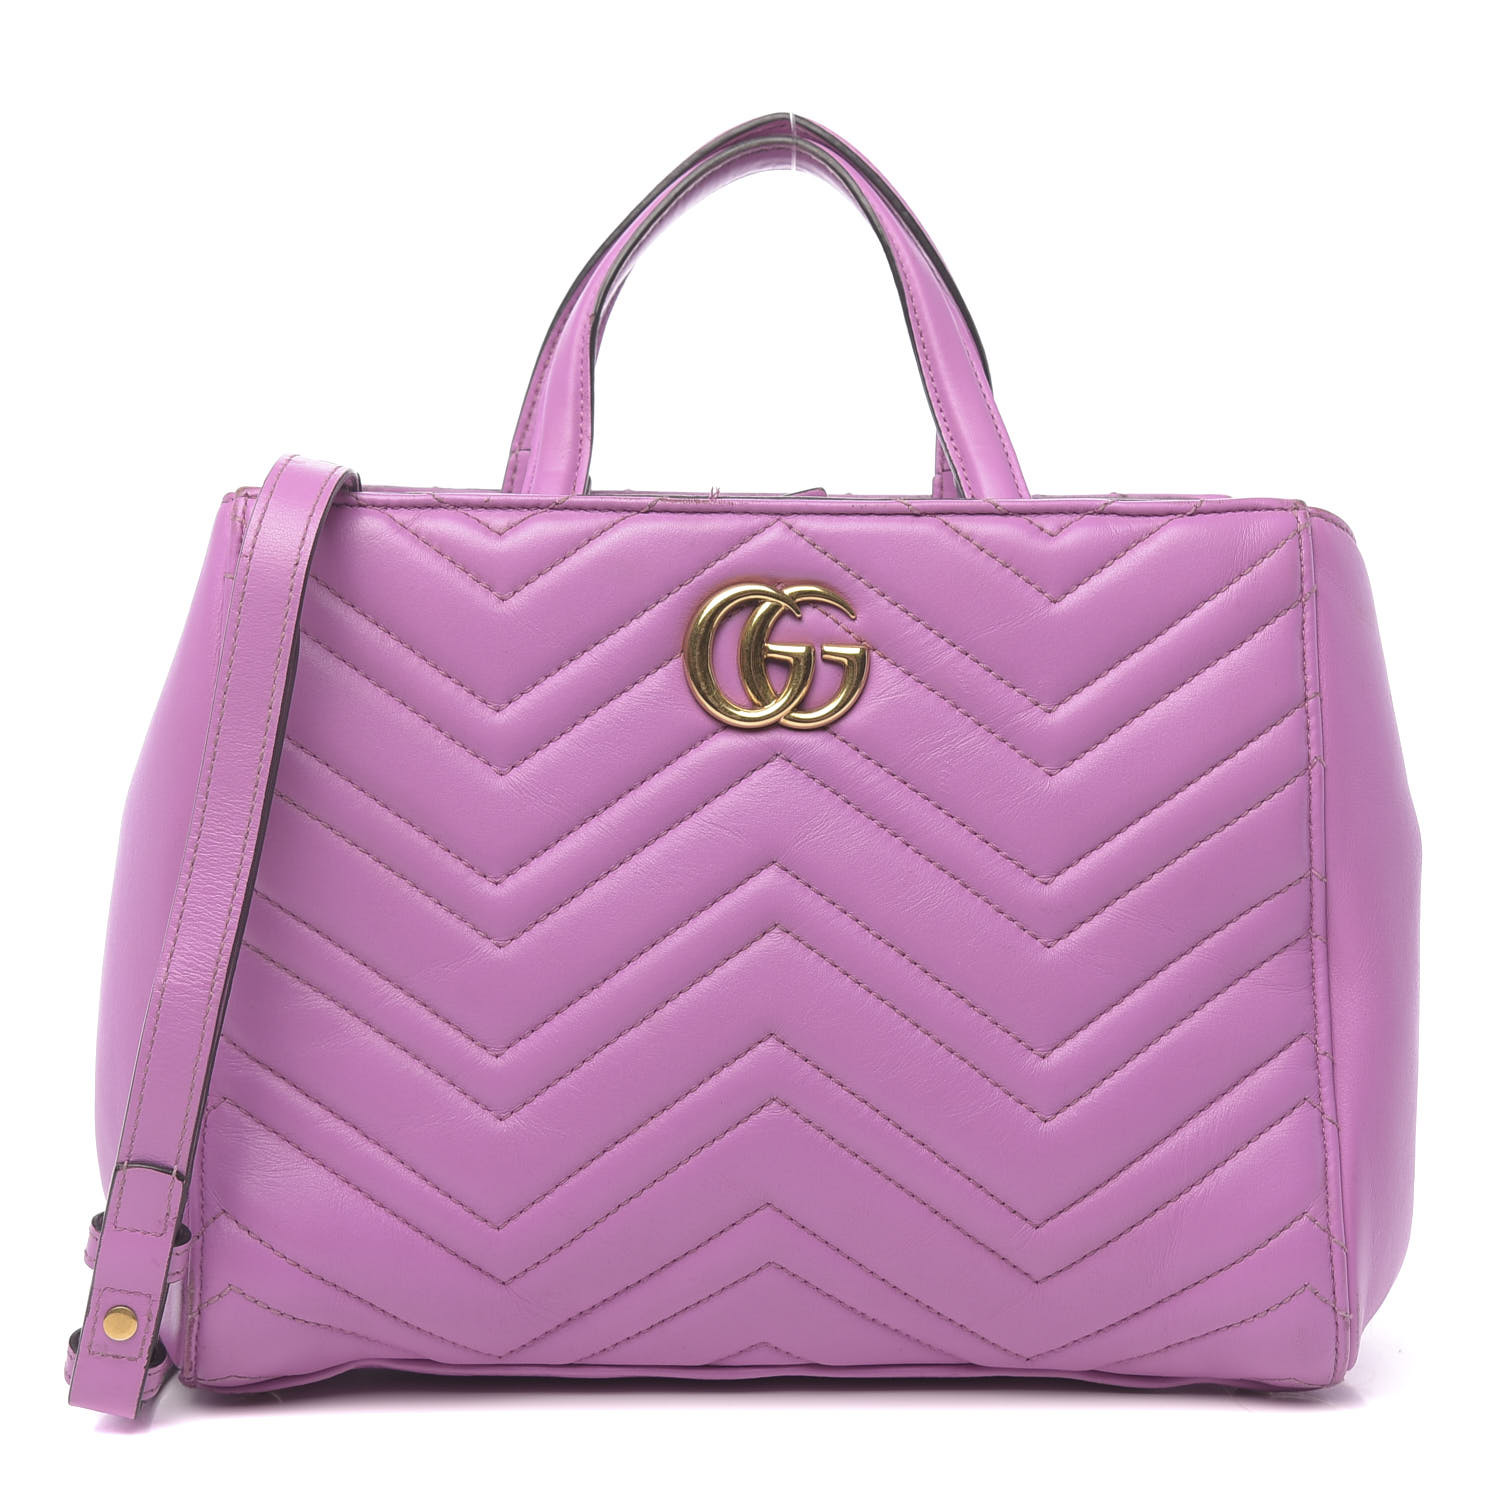 gucci marmont candy pink